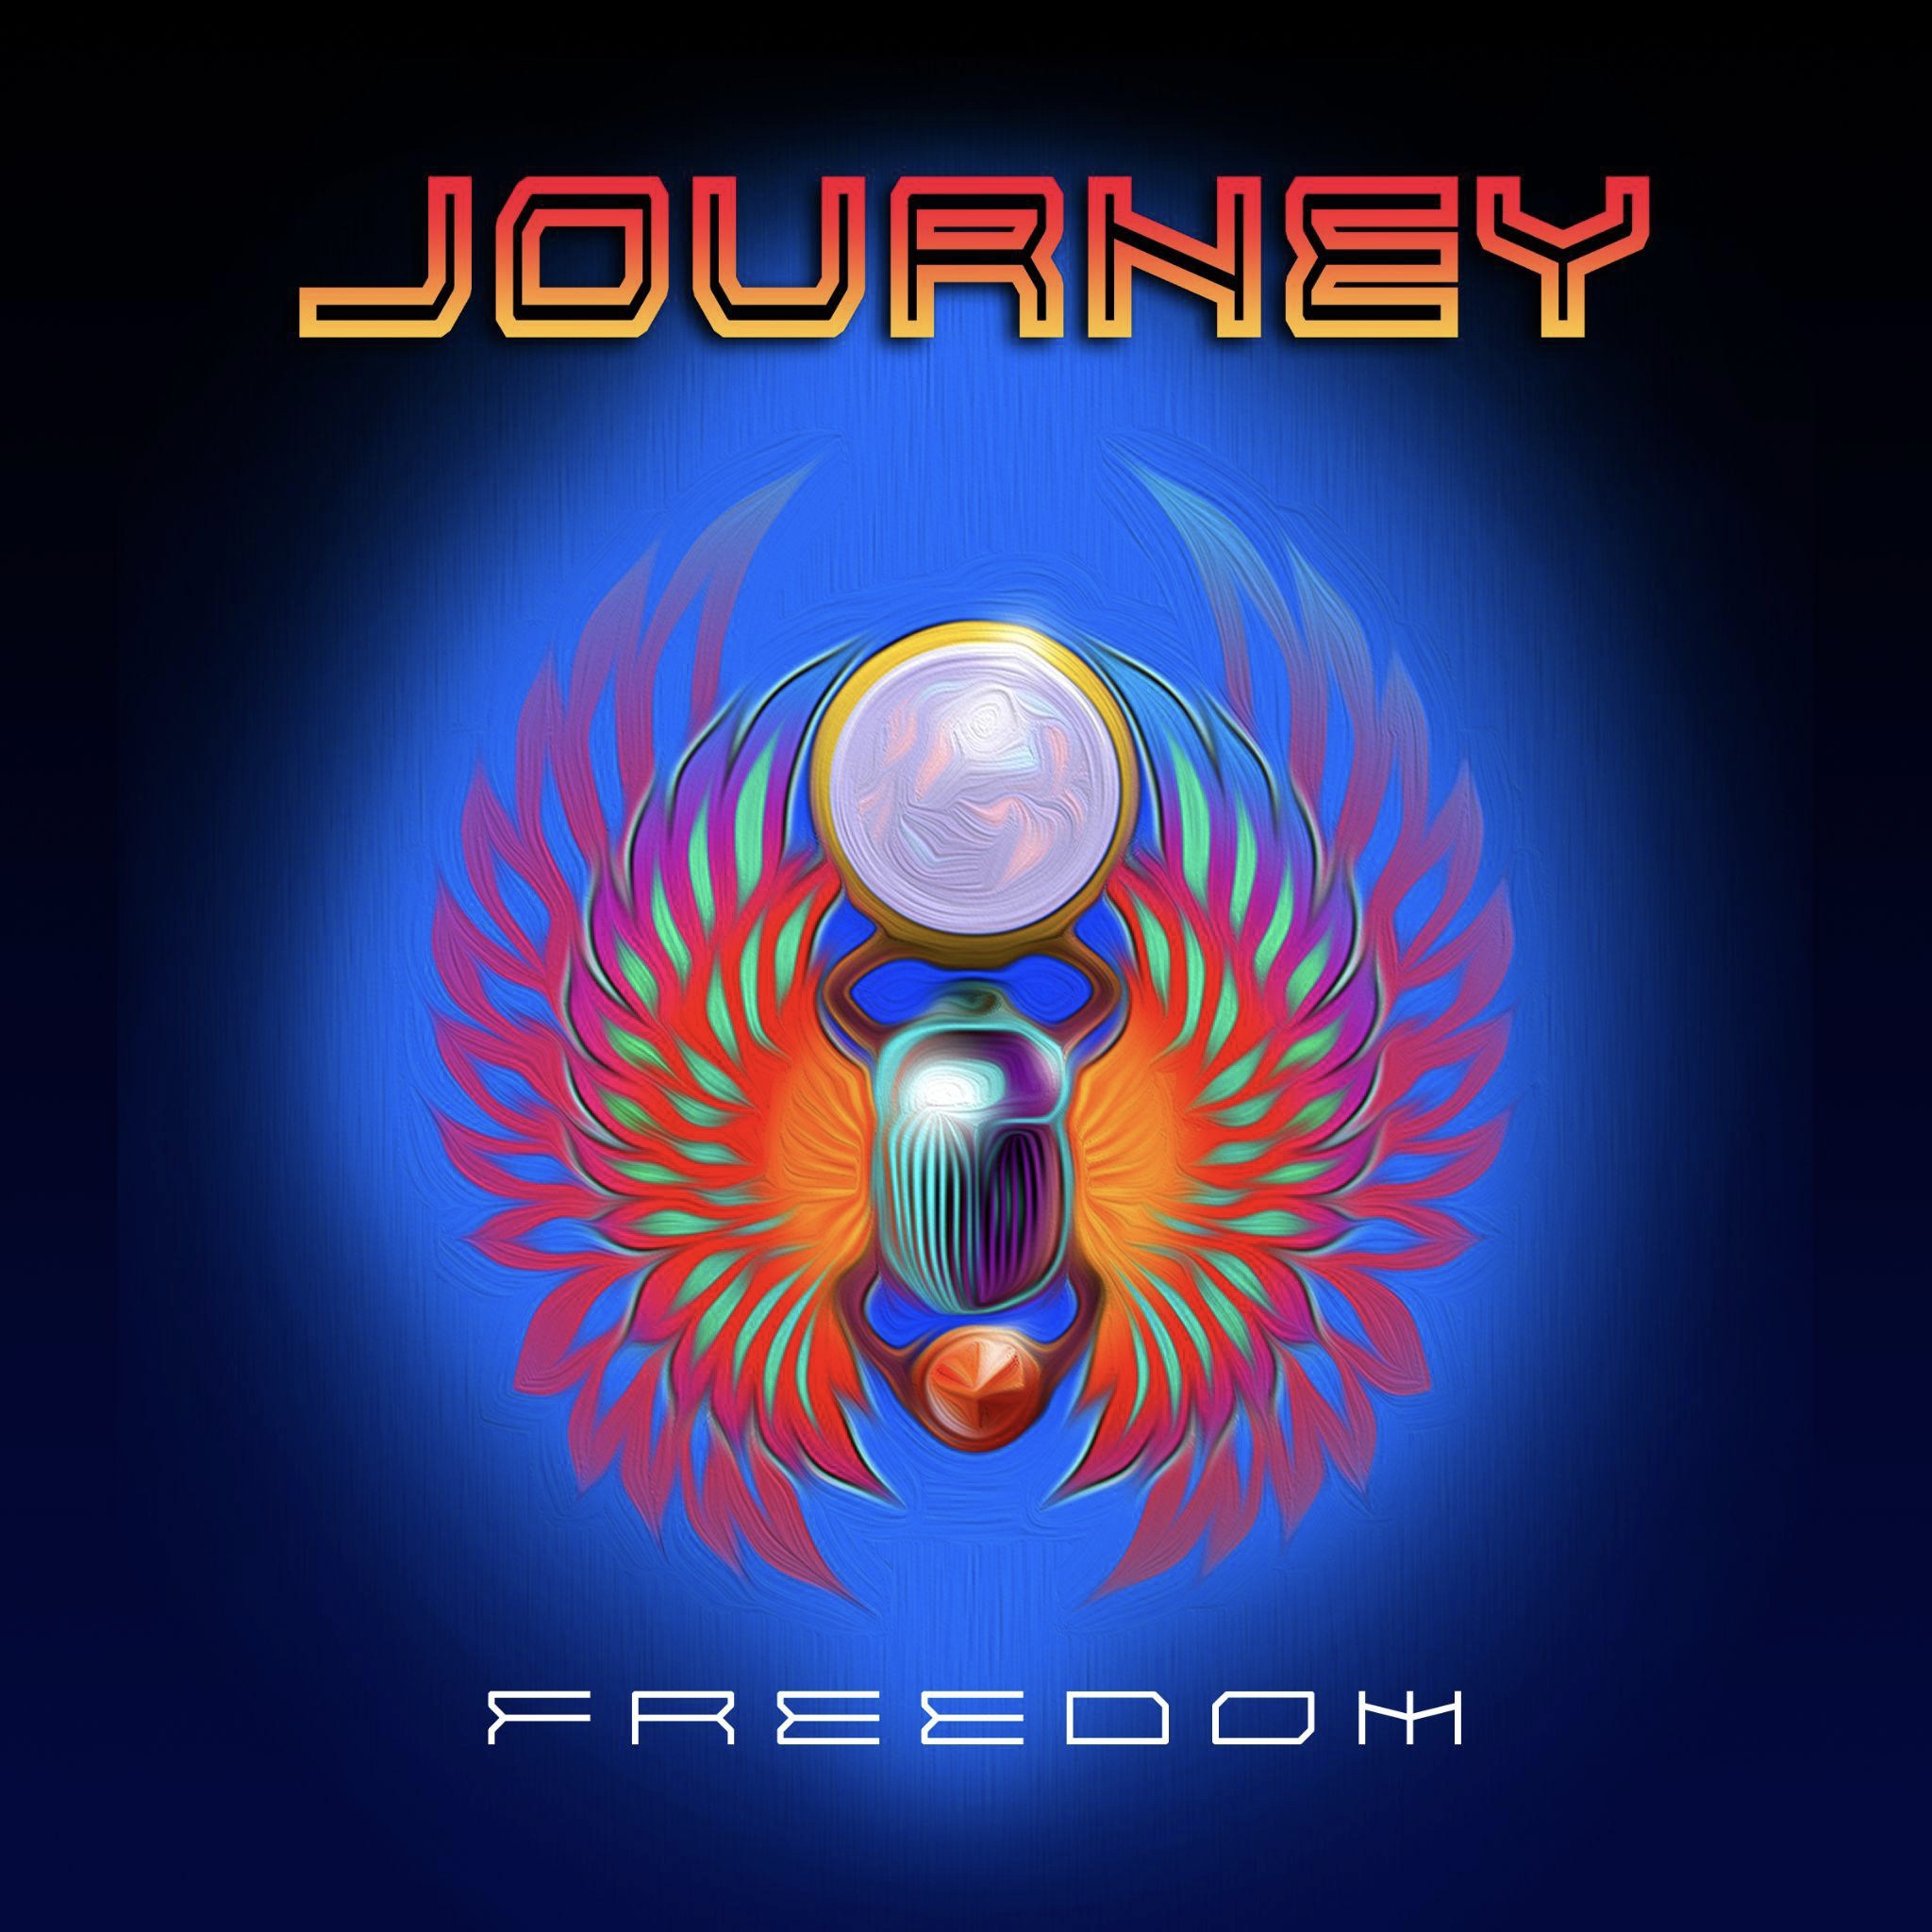 journey cover youtube